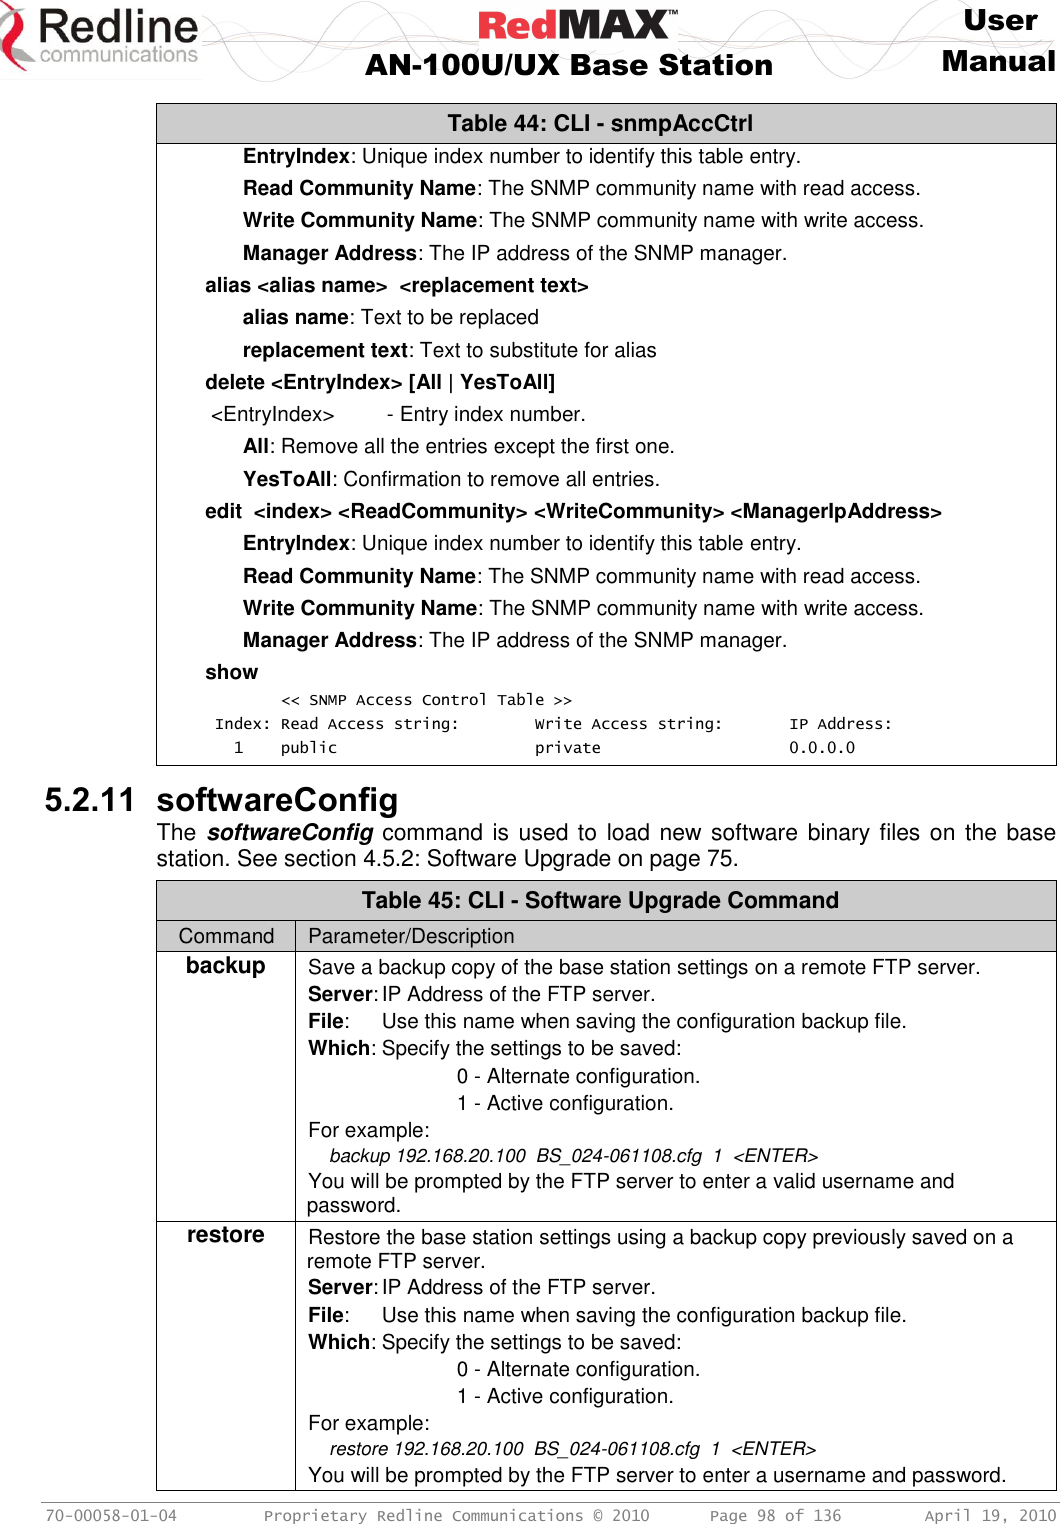     User  AN-100U/UX Base Station Manual   70-00058-01-04  Proprietary Redline Communications © 2010   Page 98 of 136  April 19, 2010 Table 44: CLI - snmpAccCtrl EntryIndex: Unique index number to identify this table entry. Read Community Name: The SNMP community name with read access. Write Community Name: The SNMP community name with write access. Manager Address: The IP address of the SNMP manager. alias &lt;alias name&gt;  &lt;replacement text&gt; alias name: Text to be replaced replacement text: Text to substitute for alias delete &lt;EntryIndex&gt; [All | YesToAll]  &lt;EntryIndex&gt;         - Entry index number. All: Remove all the entries except the first one. YesToAll: Confirmation to remove all entries. edit  &lt;index&gt; &lt;ReadCommunity&gt; &lt;WriteCommunity&gt; &lt;ManagerIpAddress&gt; EntryIndex: Unique index number to identify this table entry. Read Community Name: The SNMP community name with read access. Write Community Name: The SNMP community name with write access. Manager Address: The IP address of the SNMP manager. show         &lt;&lt; SNMP Access Control Table &gt;&gt;  Index: Read Access string:        Write Access string:       IP Address:    1    public                     private                    0.0.0.0  5.2.11 softwareConfig The softwareConfig command is  used to  load new software binary files on the base station. See section 4.5.2: Software Upgrade on page 75. Table 45: CLI - Software Upgrade Command Command Parameter/Description backup Save a backup copy of the base station settings on a remote FTP server. Server: IP Address of the FTP server. File:  Use this name when saving the configuration backup file. Which: Specify the settings to be saved:     0 - Alternate configuration.     1 - Active configuration. For example:      backup 192.168.20.100  BS_024-061108.cfg  1  &lt;ENTER&gt; You will be prompted by the FTP server to enter a valid username and password. restore Restore the base station settings using a backup copy previously saved on a remote FTP server. Server: IP Address of the FTP server. File:  Use this name when saving the configuration backup file. Which: Specify the settings to be saved:     0 - Alternate configuration.     1 - Active configuration. For example:      restore 192.168.20.100  BS_024-061108.cfg  1  &lt;ENTER&gt; You will be prompted by the FTP server to enter a username and password. 